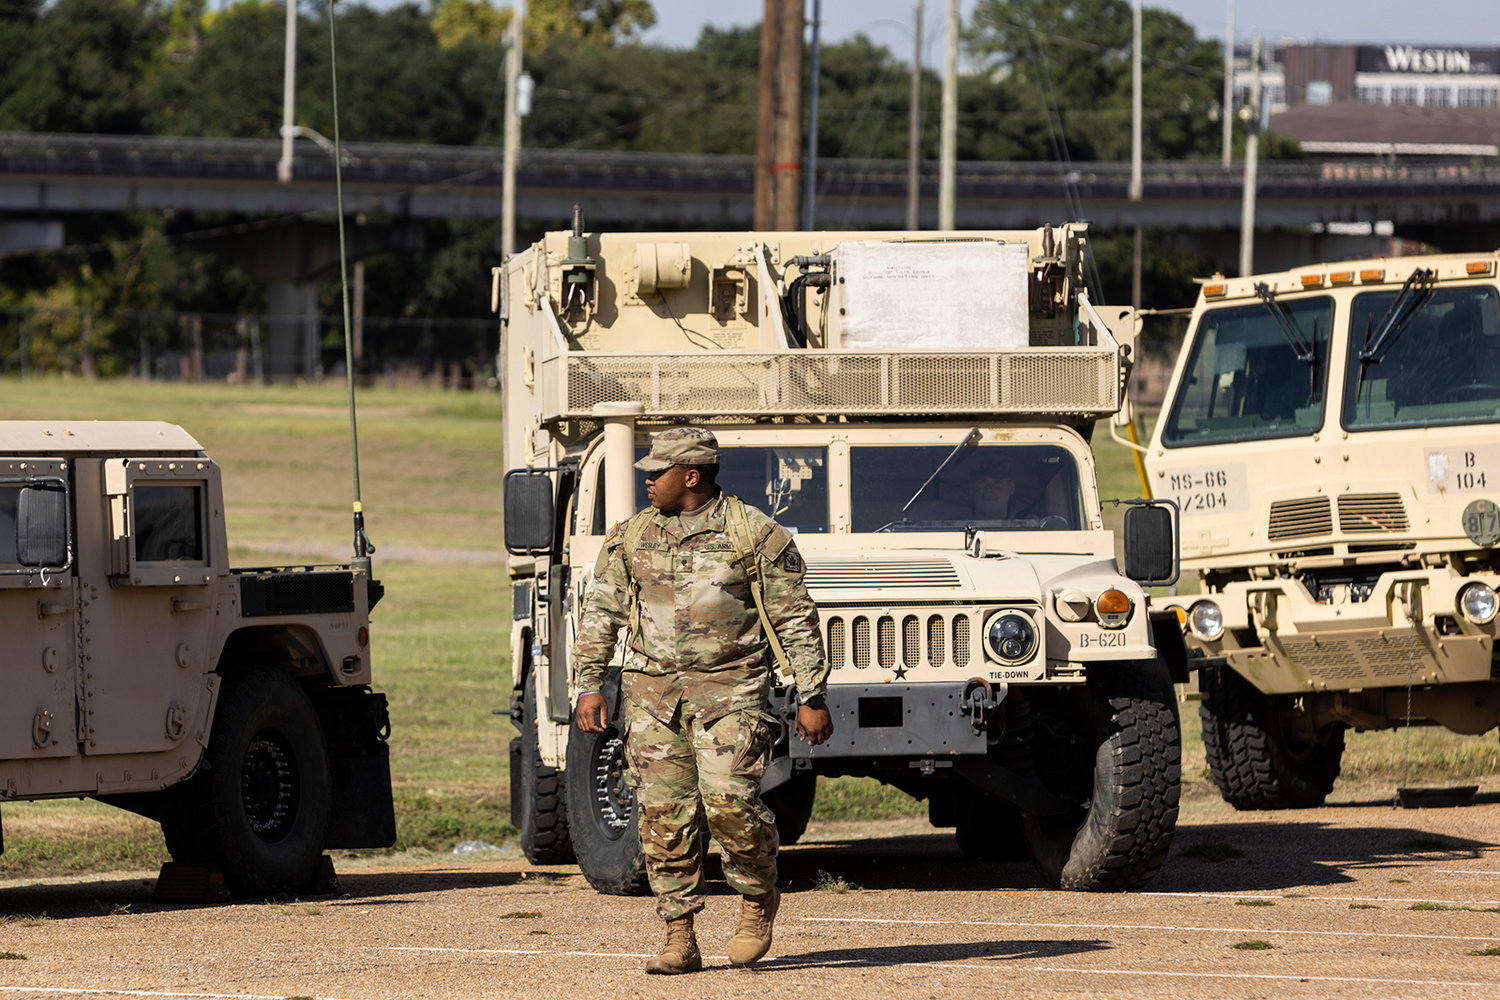 Personnel and equipment from the Mississippi National Guard organize inside of the Mississippi State Fairgrounds in response to the water crisis on Sept. 1, 2022, in Jackson, Mississippi. Jackson has been experiencing days without reliable water service after river flooding caused the main treatment facility to fail. (Brad Vest/Getty Images/TNS)